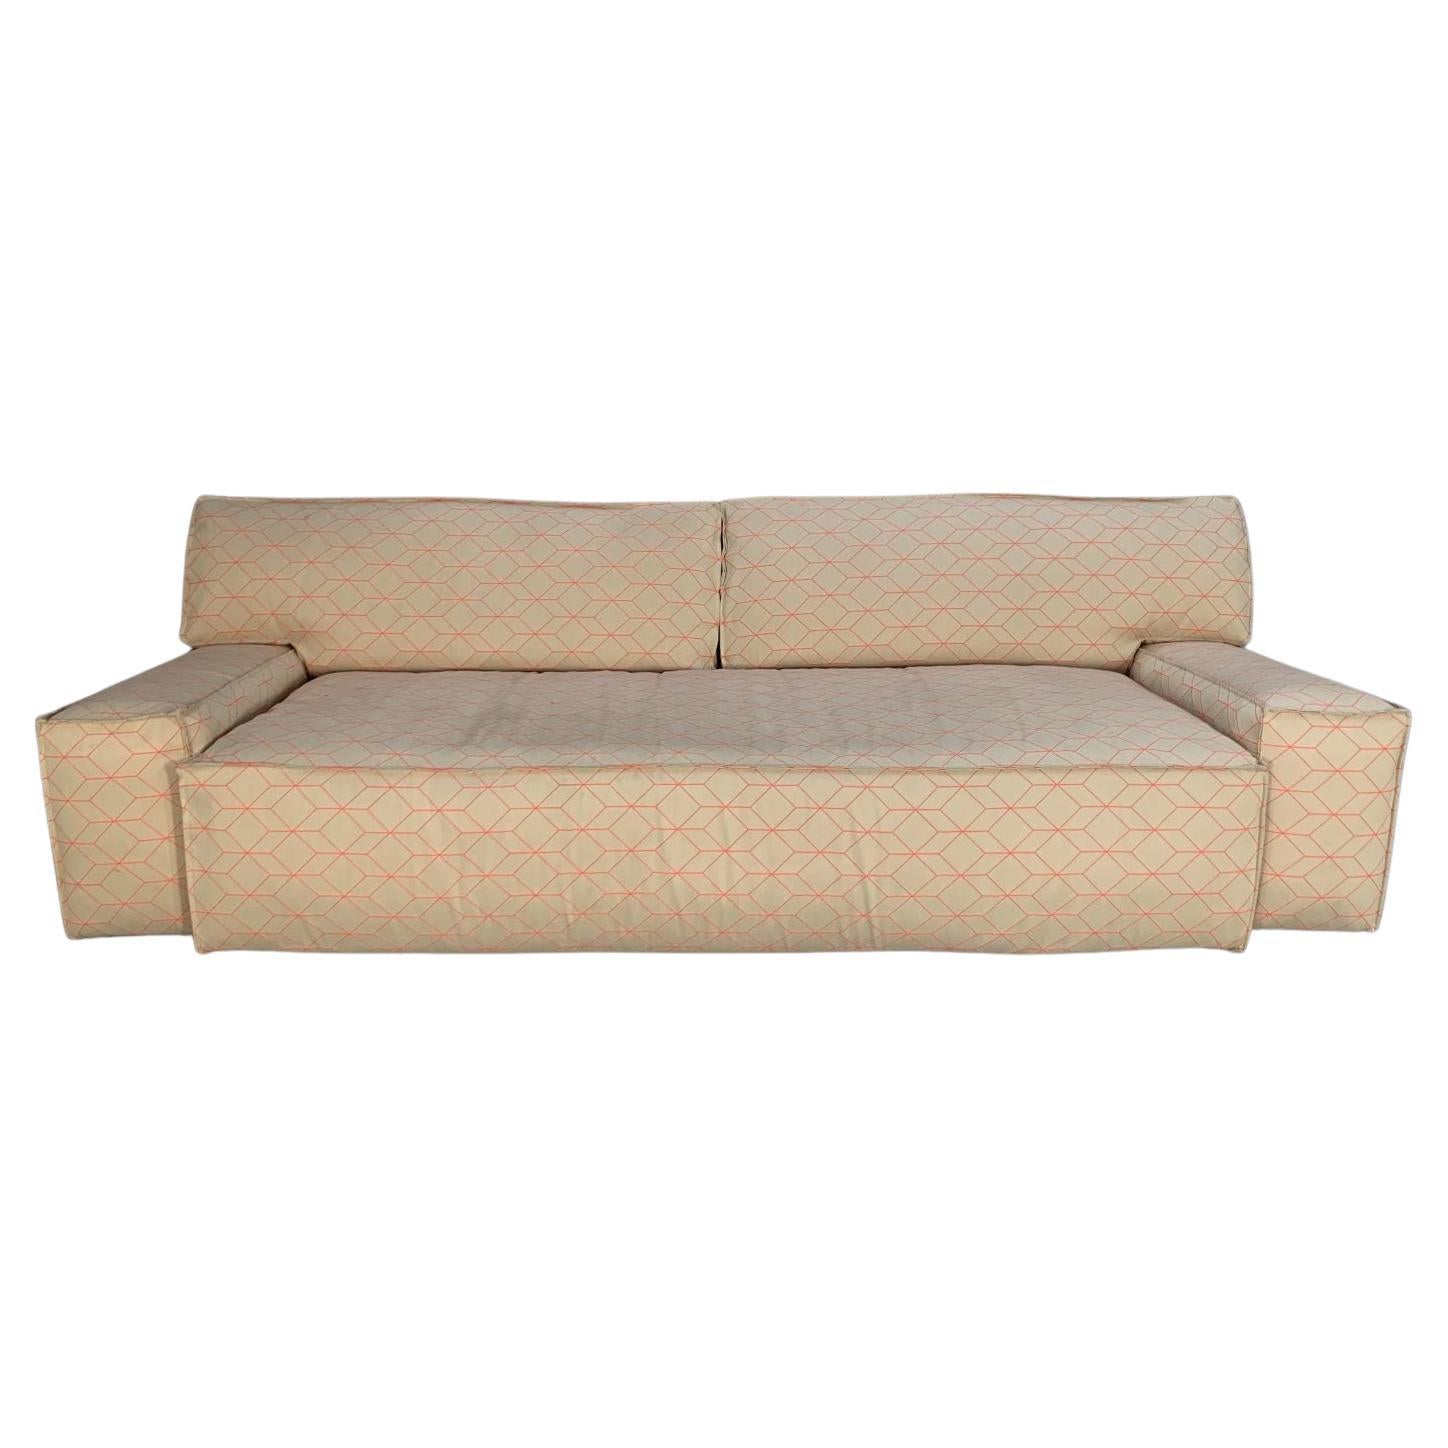 Cassina “MyWorld” 4-Seat Sectional Sofa in Geometric-Print Canvas